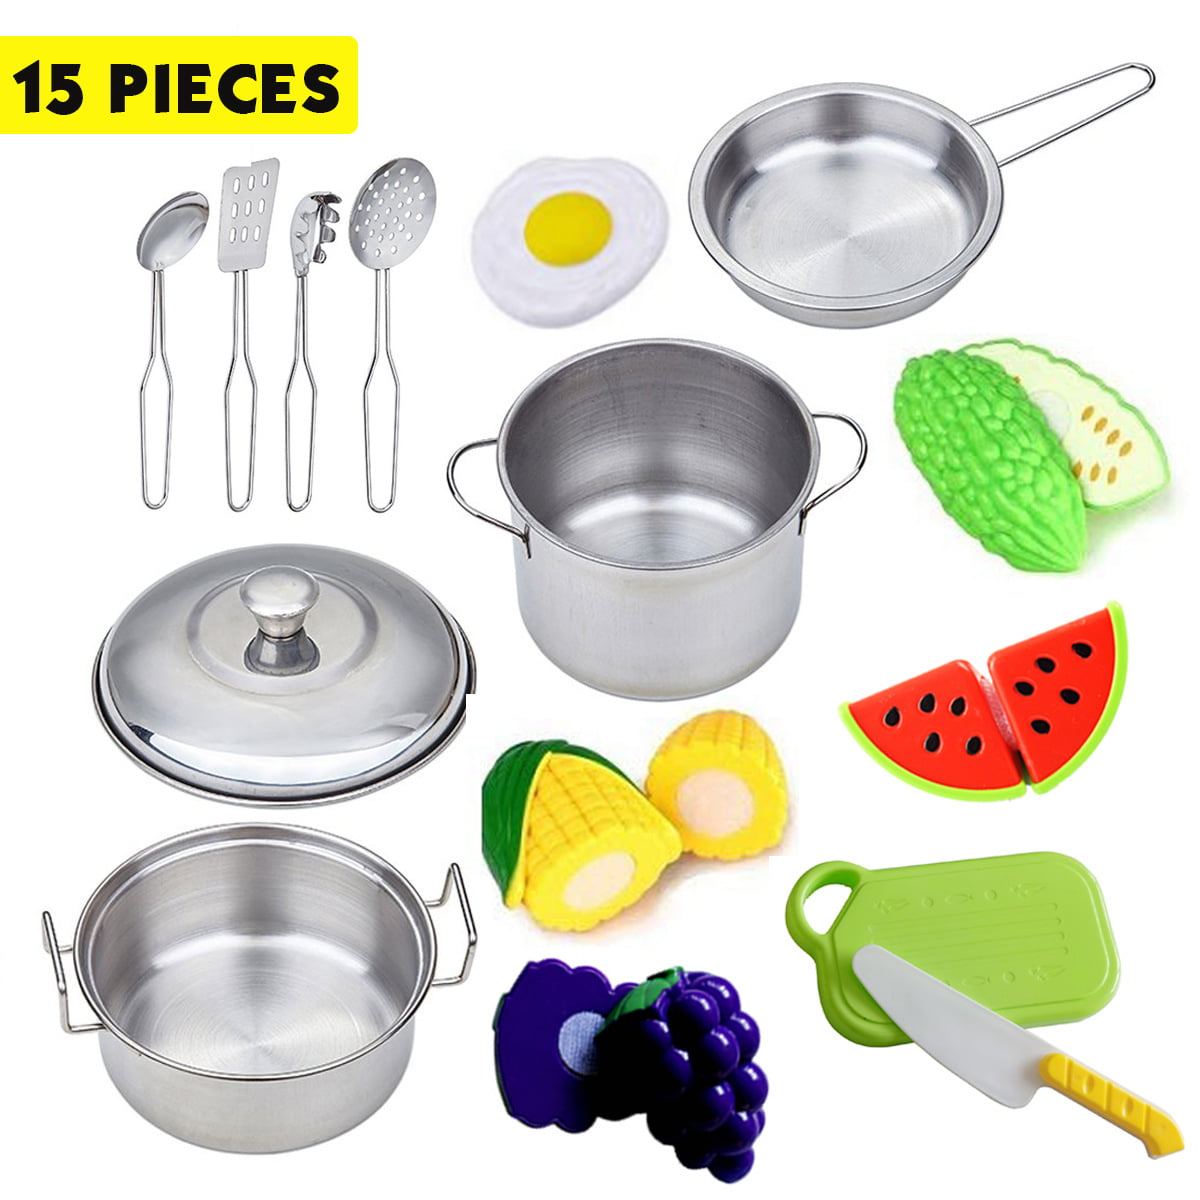 10Pcs Kid Play House Toy Kitchen Utensils Cooking Pots Pans Food Dishes Cookware 